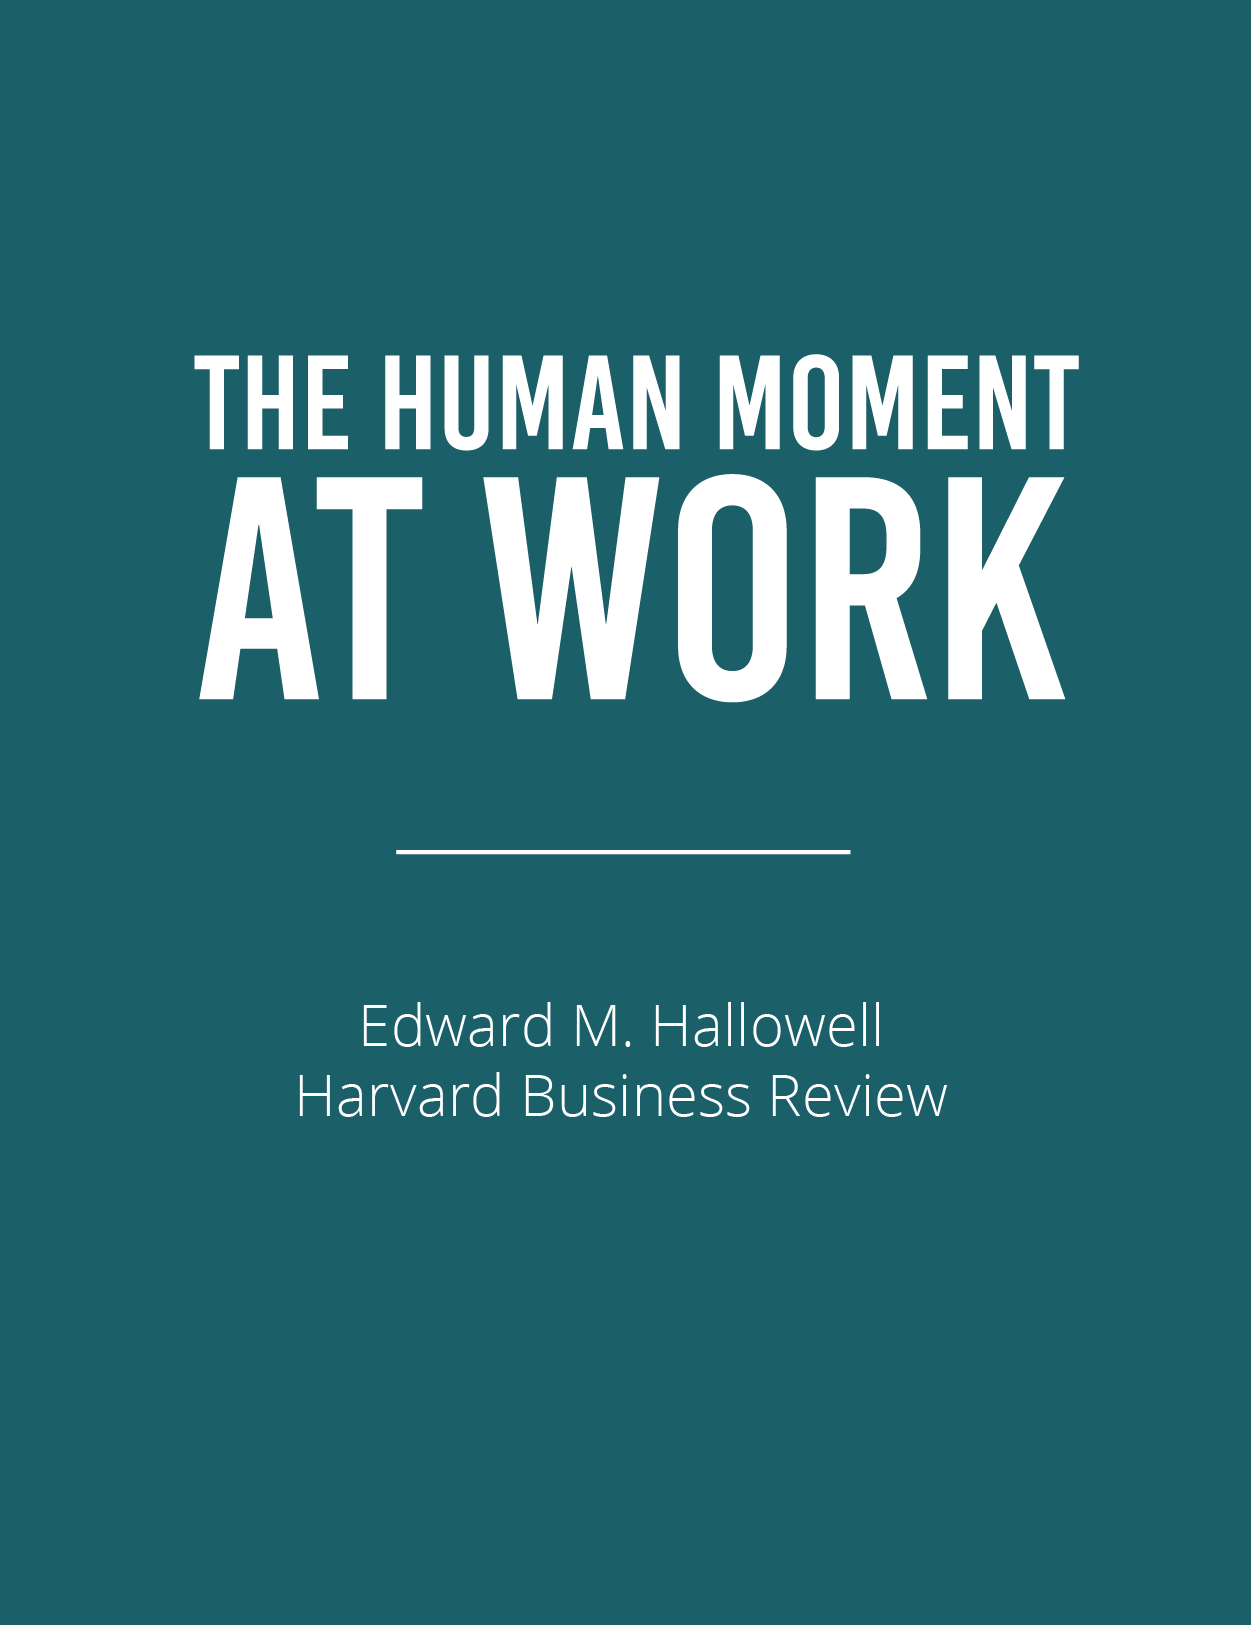 The Human Moment at WorkFeatured Image